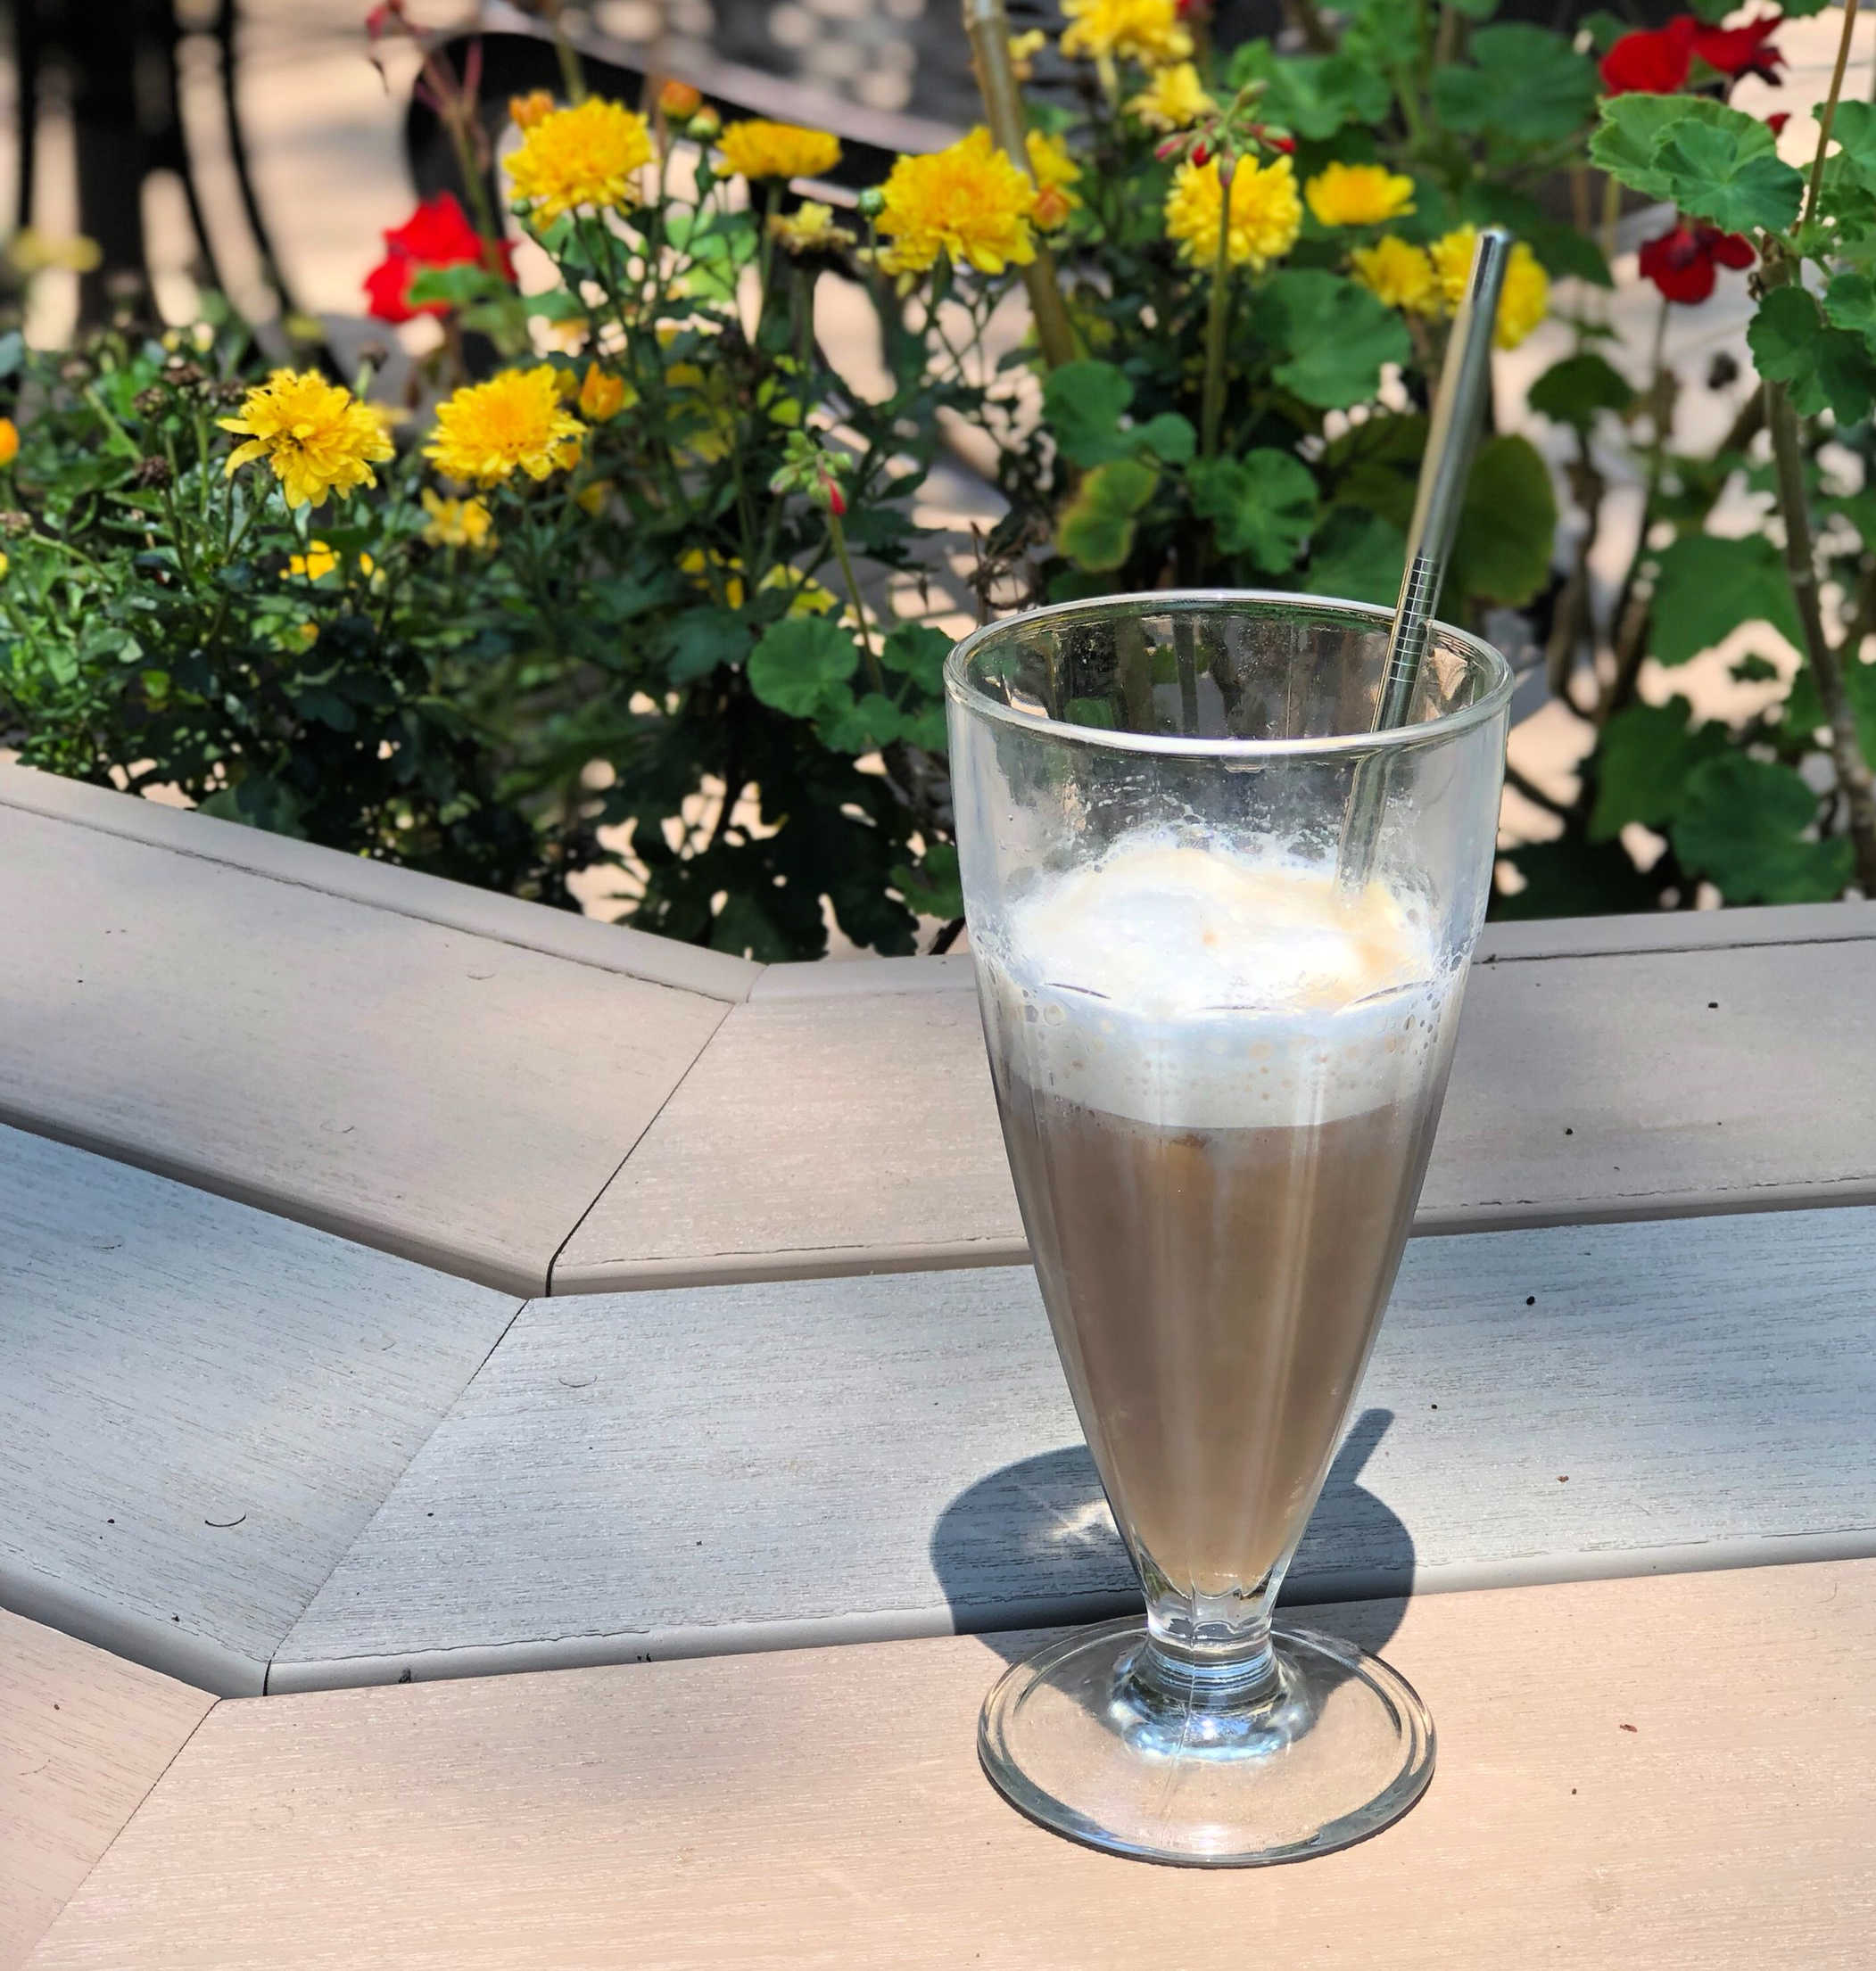 healthy iced latte in front of a flower pot